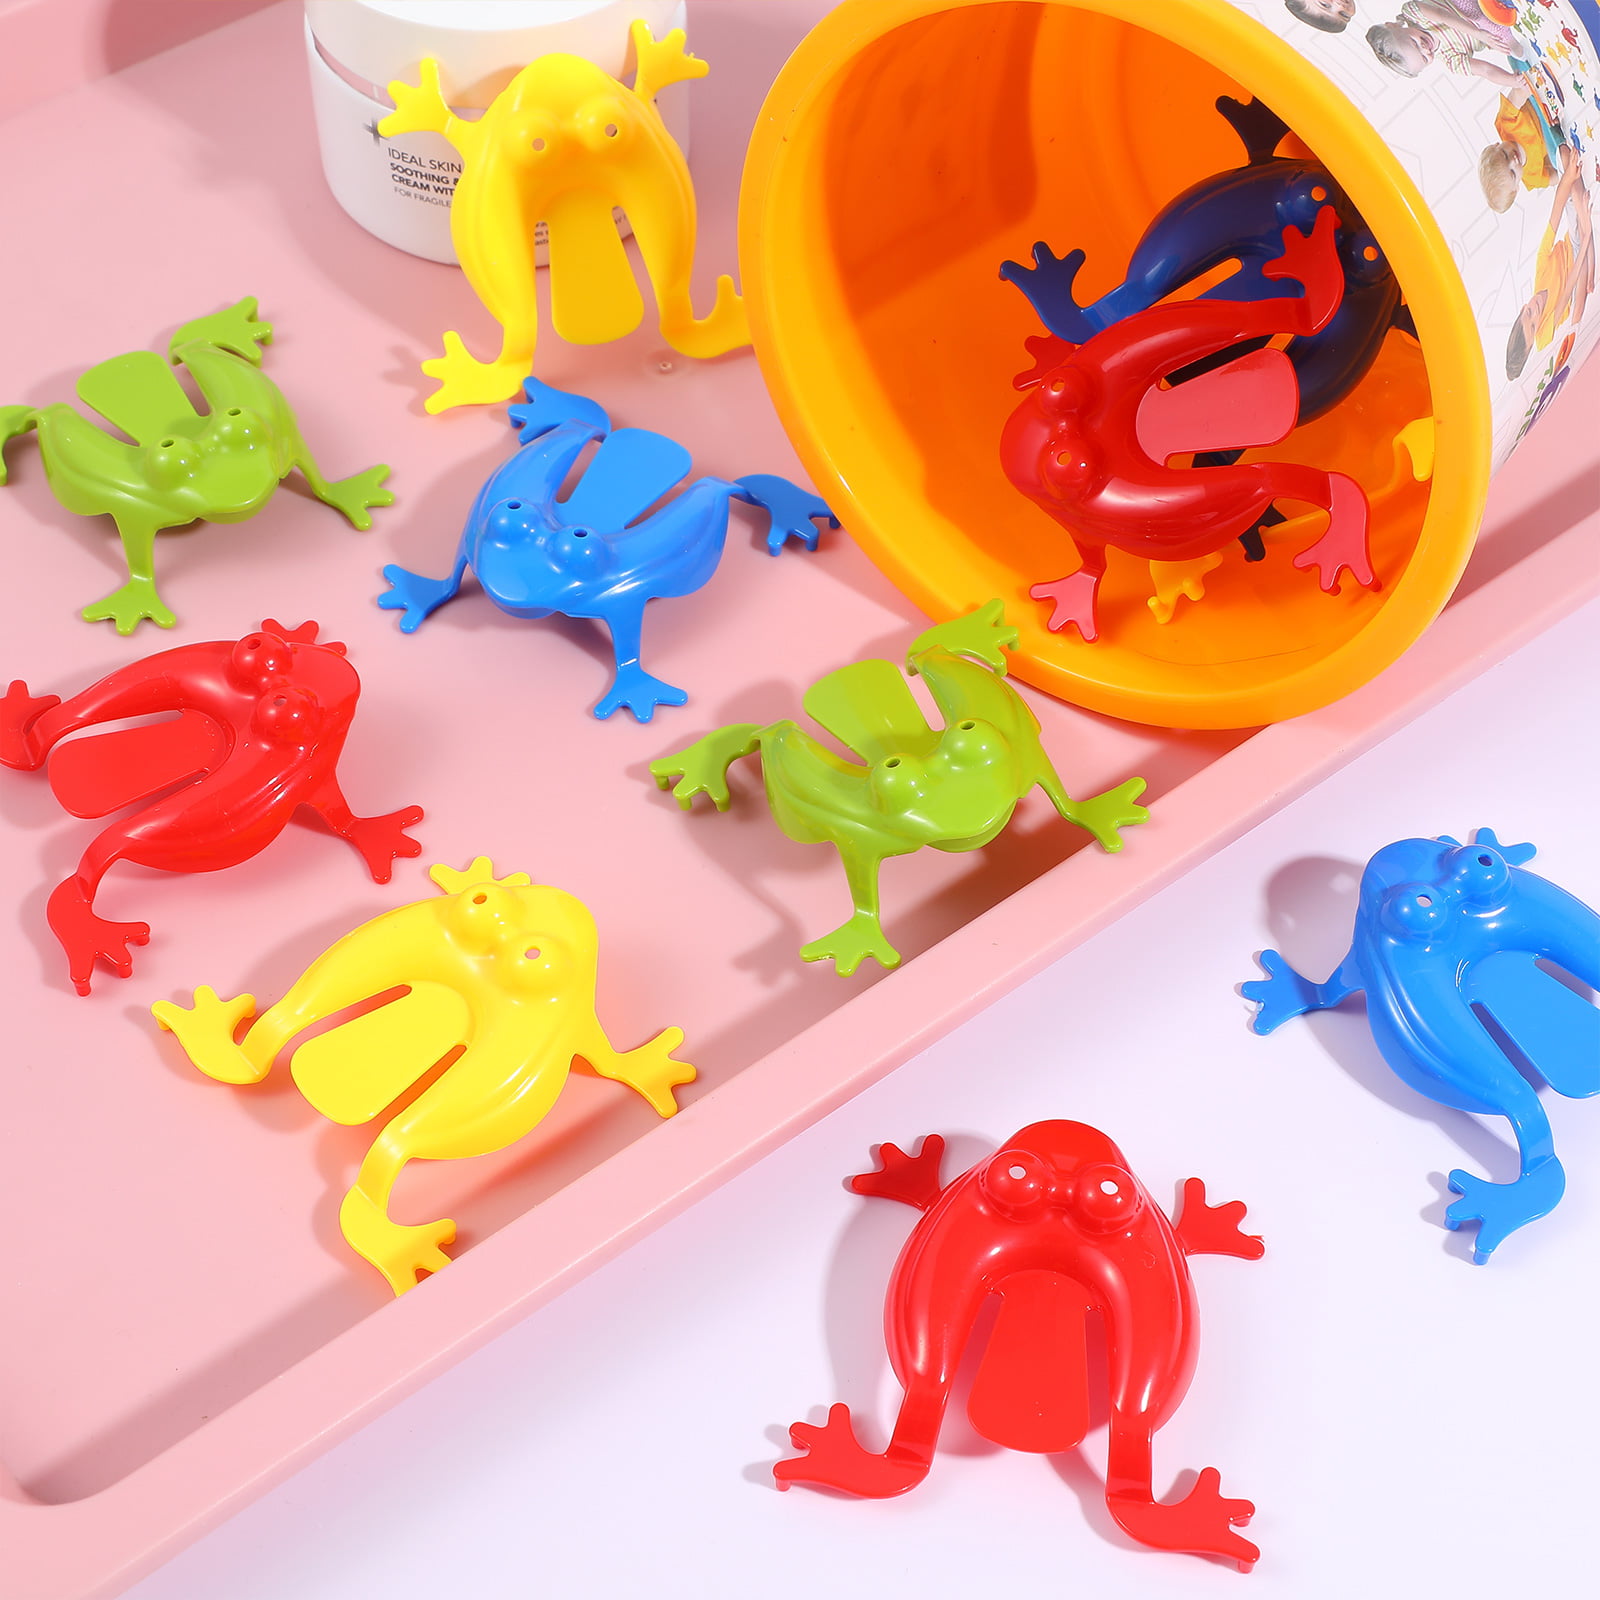 12pcs Jumping Frog Toy Bouncing Frog Plastic Frog Toys Mini Frog Figurines  Figure Reptile Animals Figures Models for Kids 